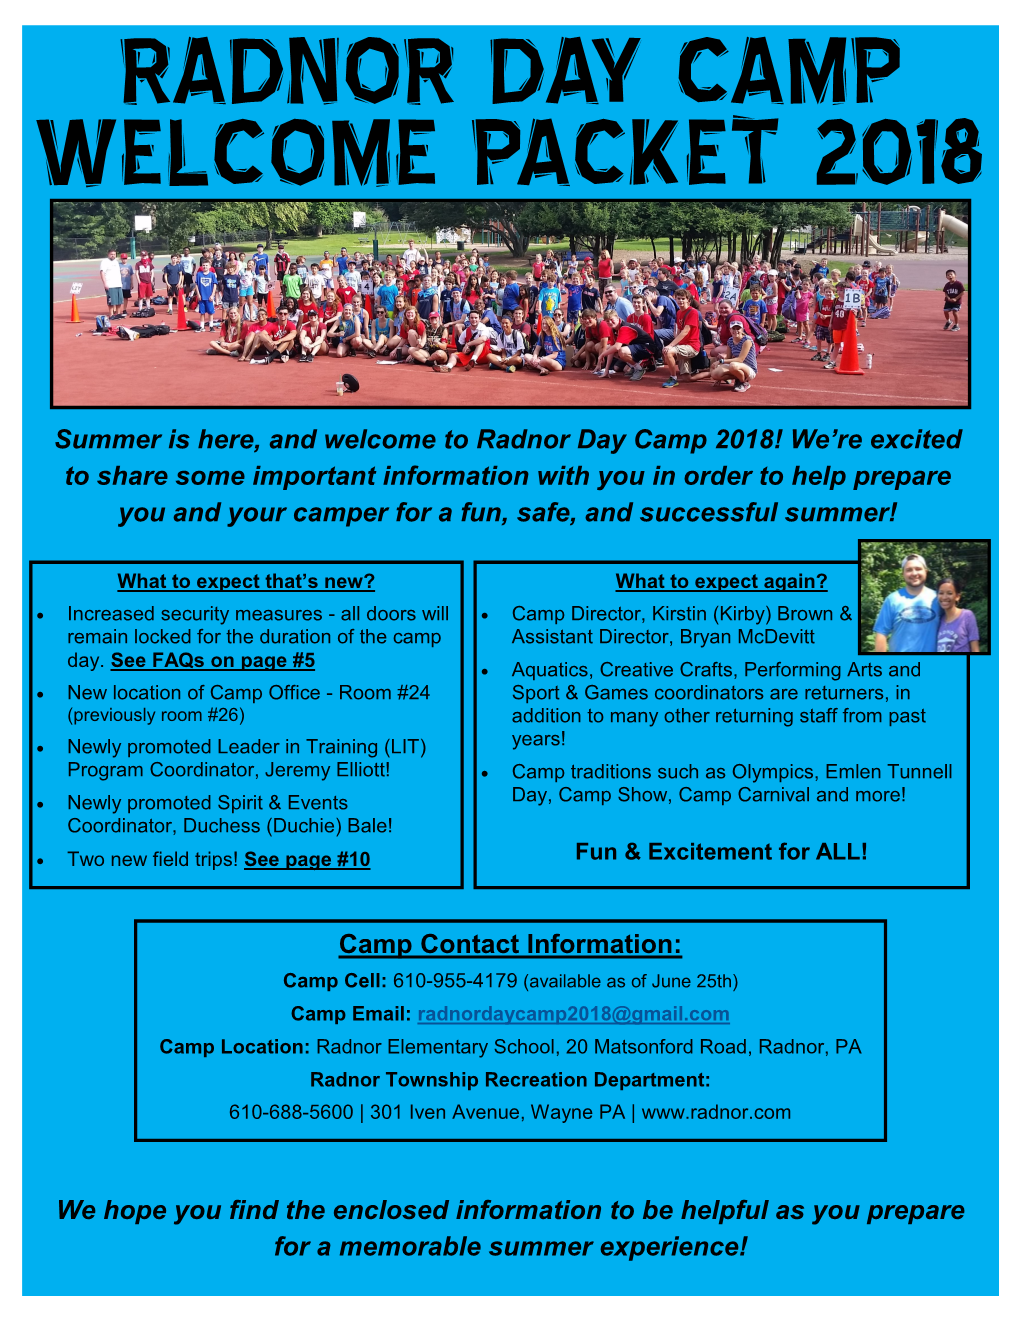 Radnor Day Camp Welcome Packet 2018